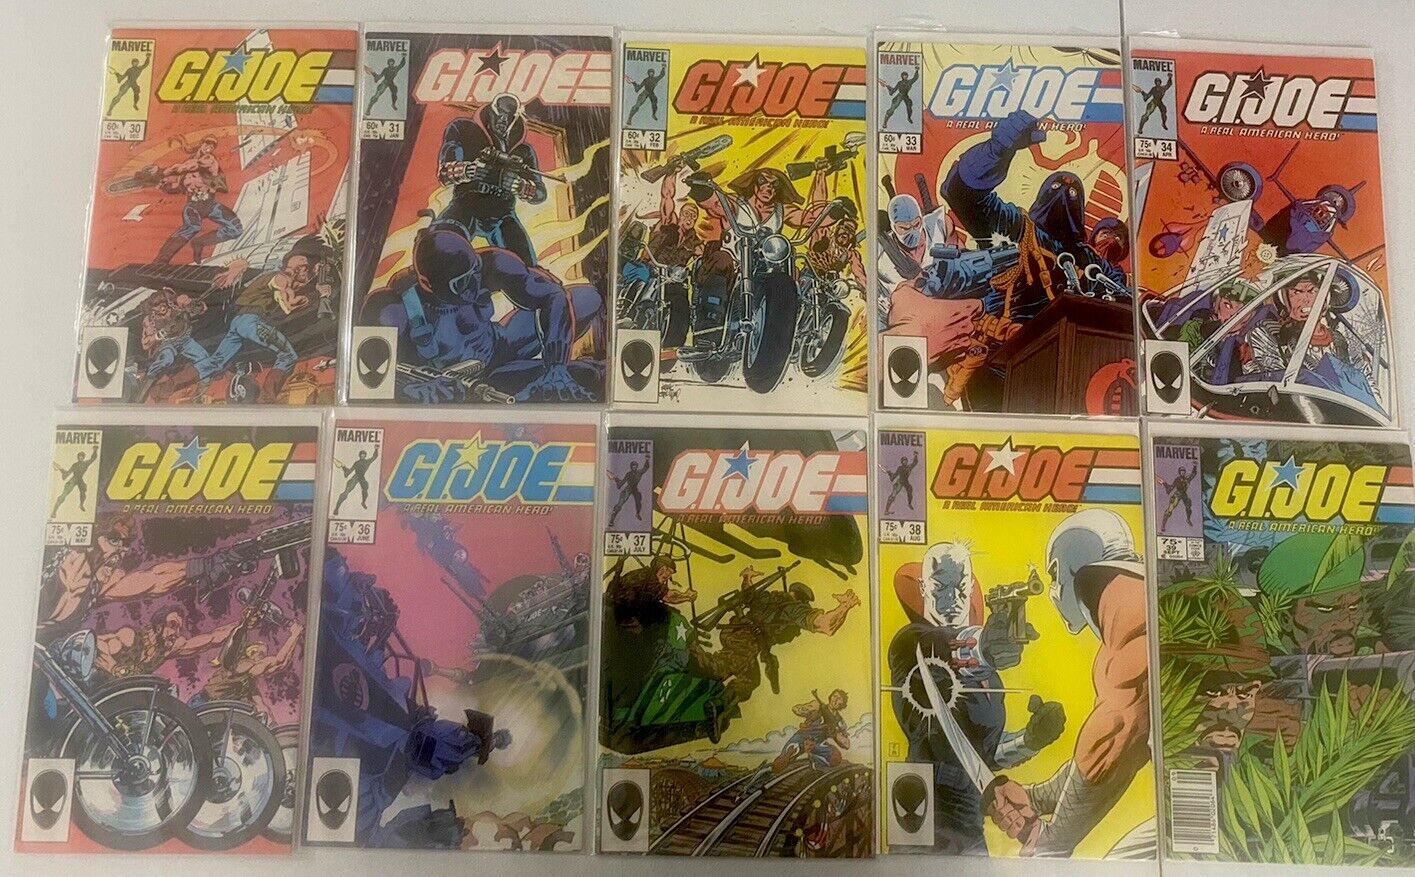 Marvel Gi Joe Comic Lot Of 10 Issues 30-39  Bagged And Boarded